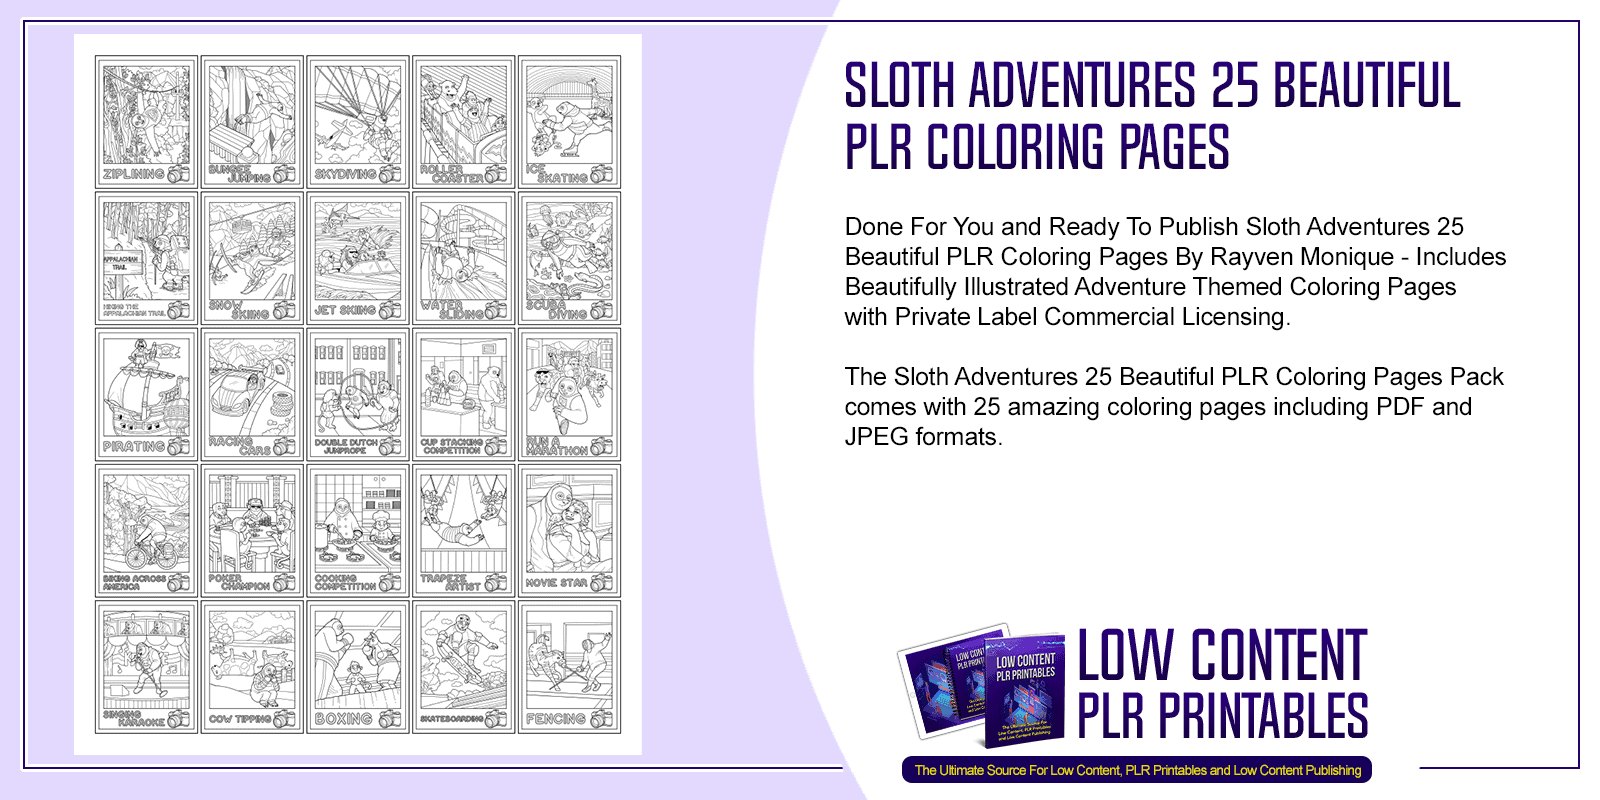 Sloth Adventures 25 Beautiful PLR Coloring Pages